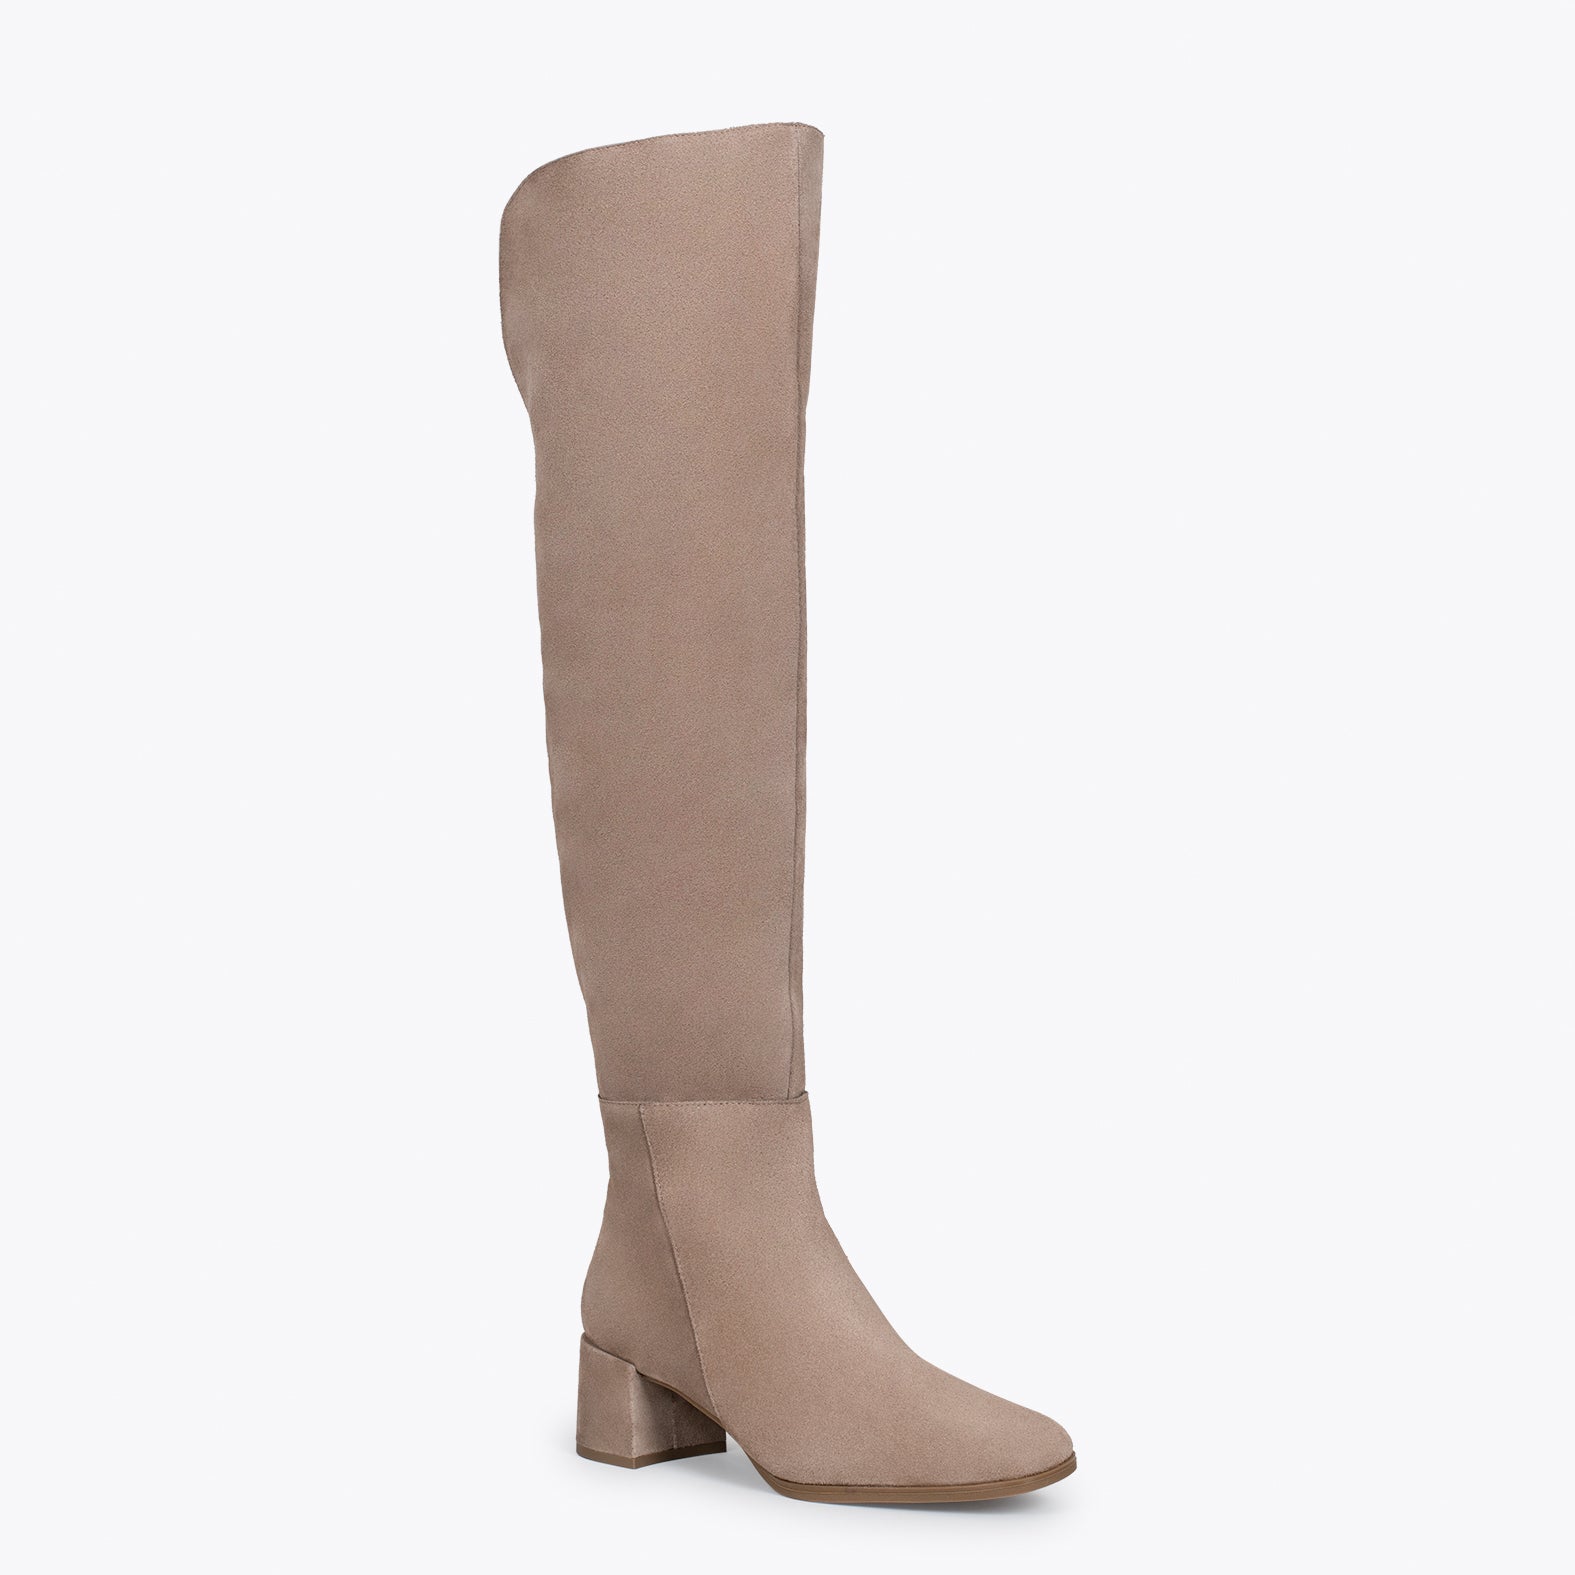 MUSKETEER – TAUPE over-the-knee boot